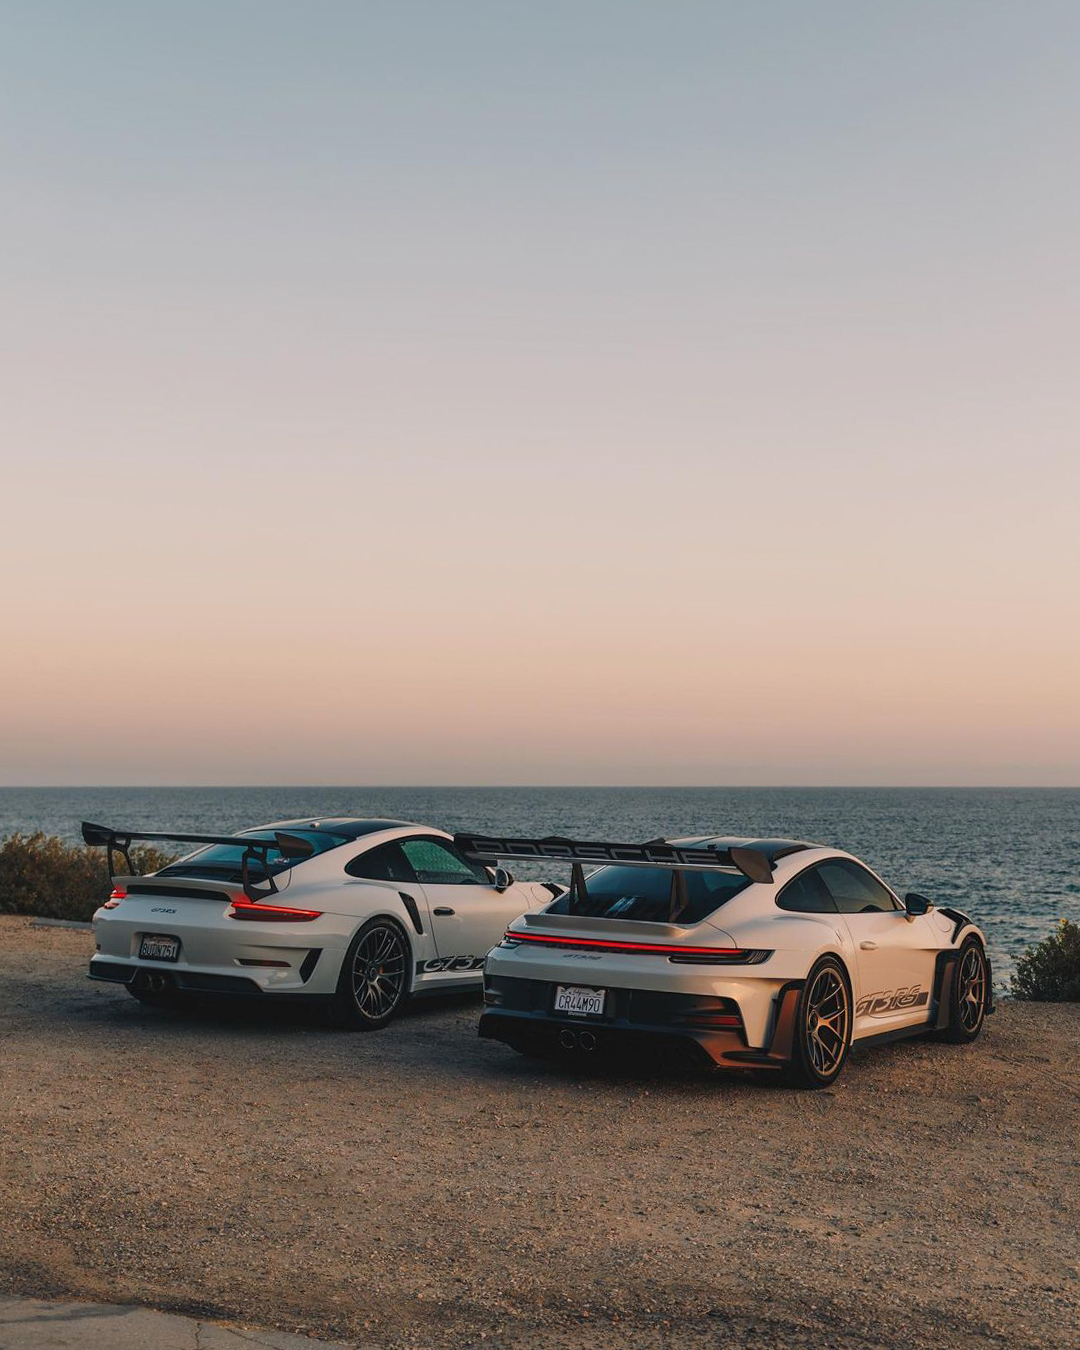 Two Porsche GT3 RS cars overlooking the ocean at sunset